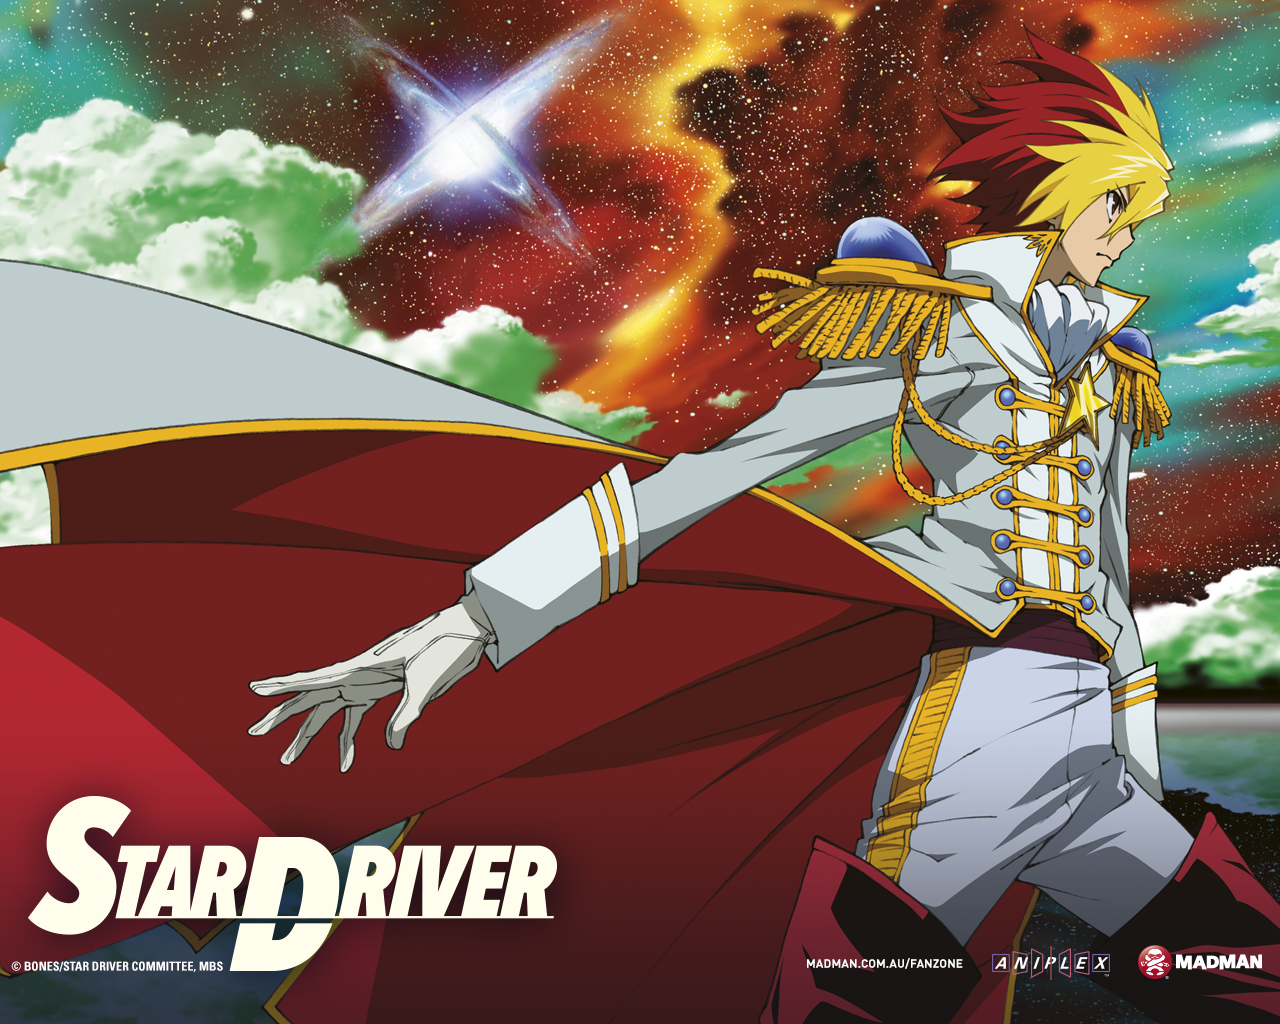 Star Driver The Movie Trailer English Subbed  YouTube